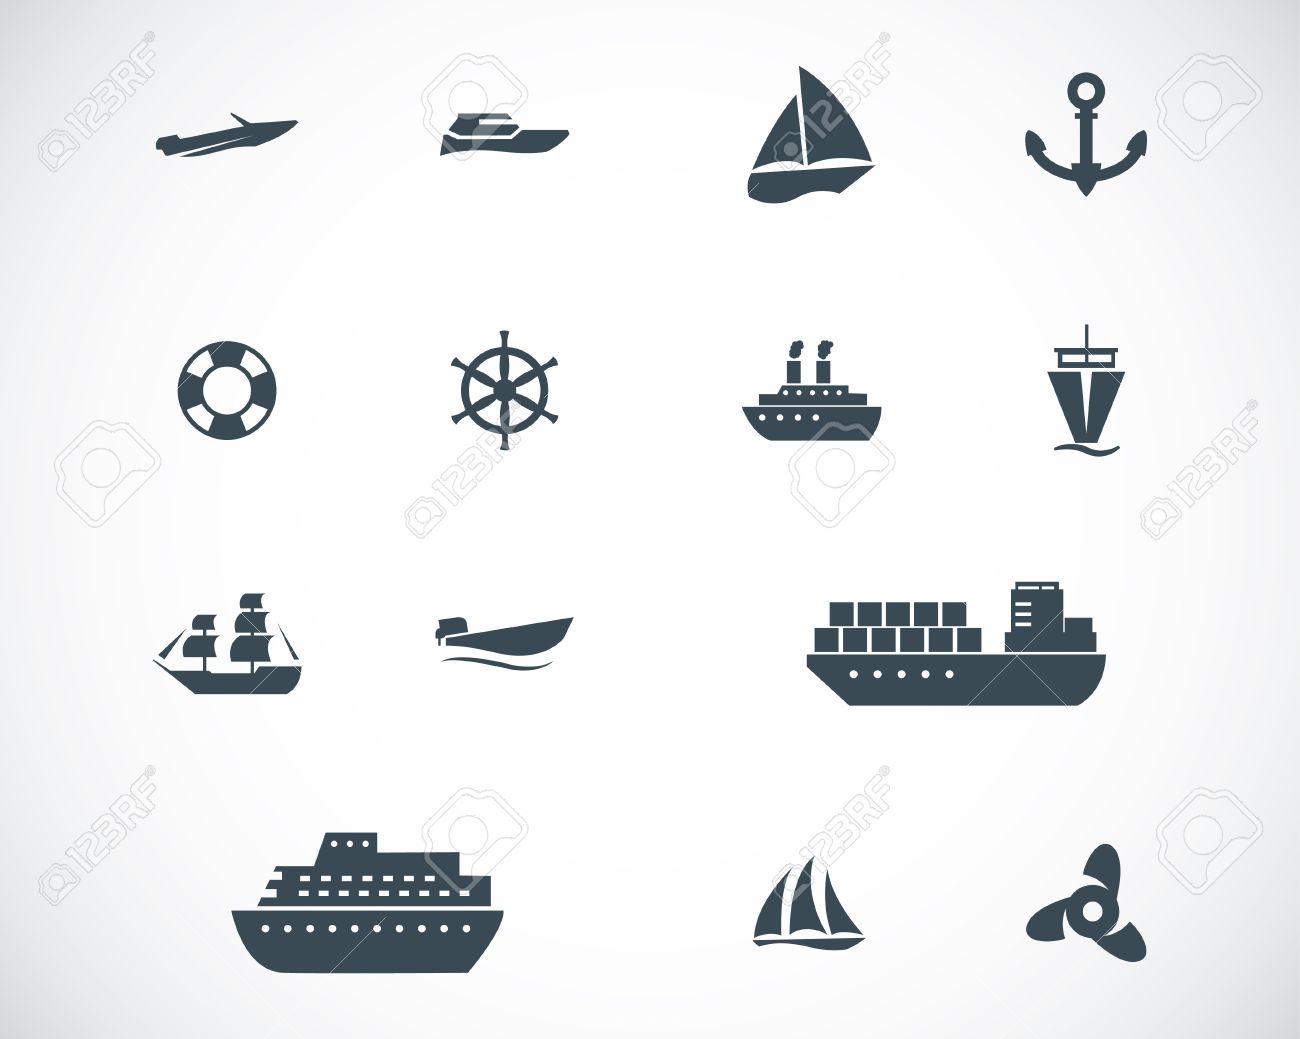 Fisherman in a boat icon Royalty Free Vector Image